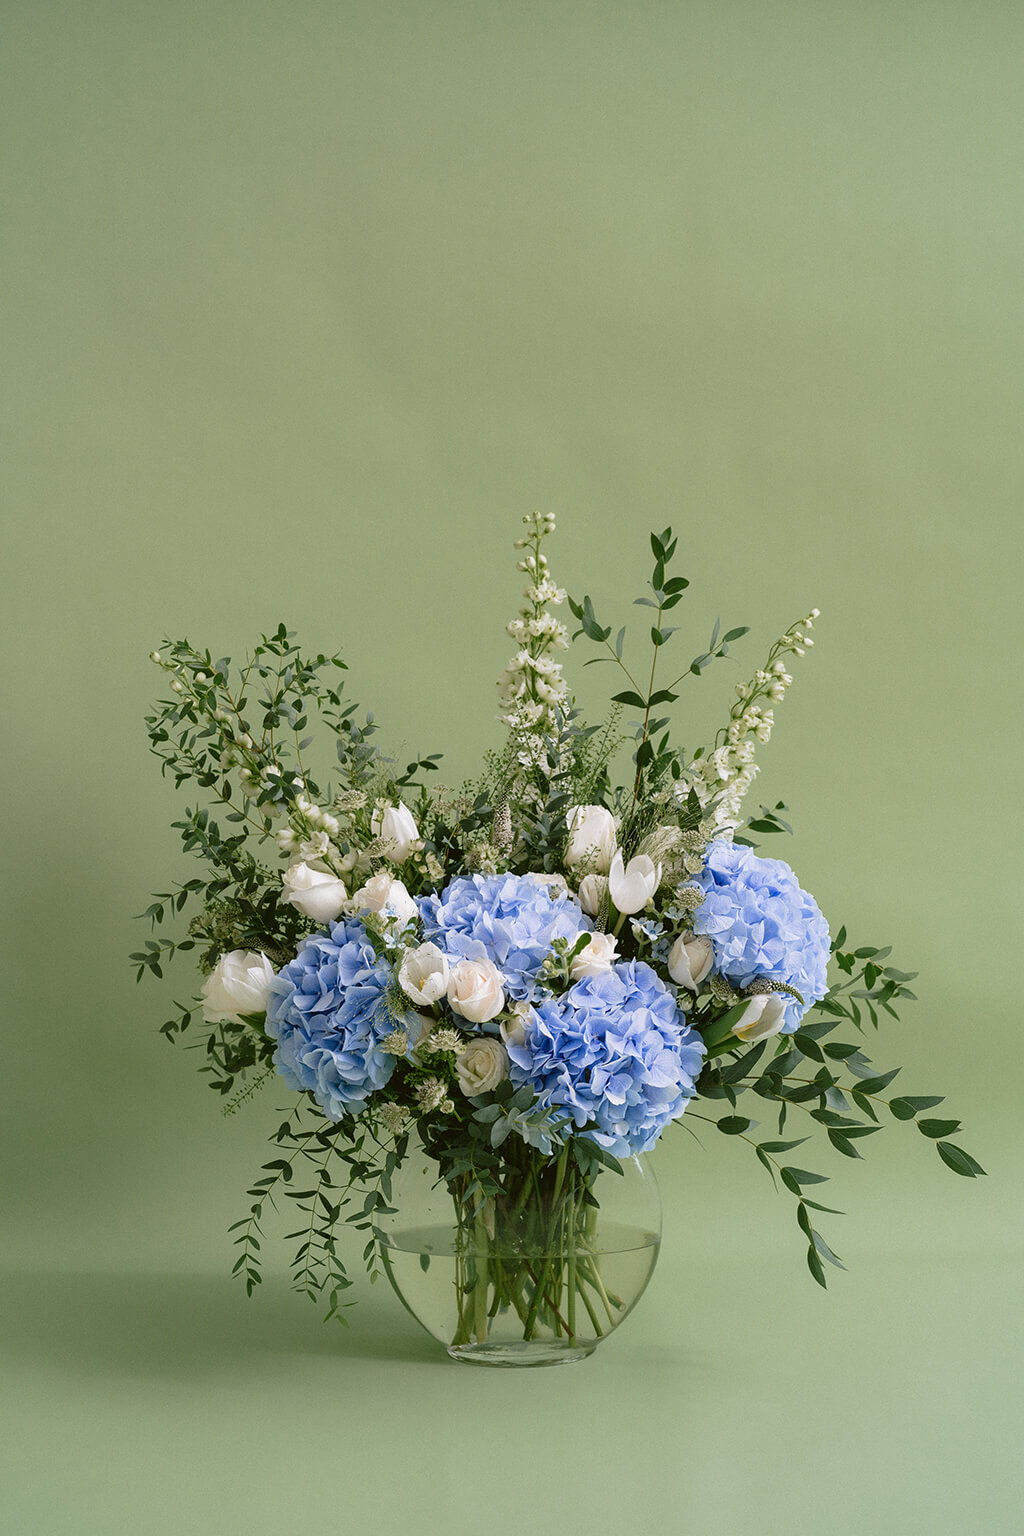 Why Should You Get A Flower Subscription